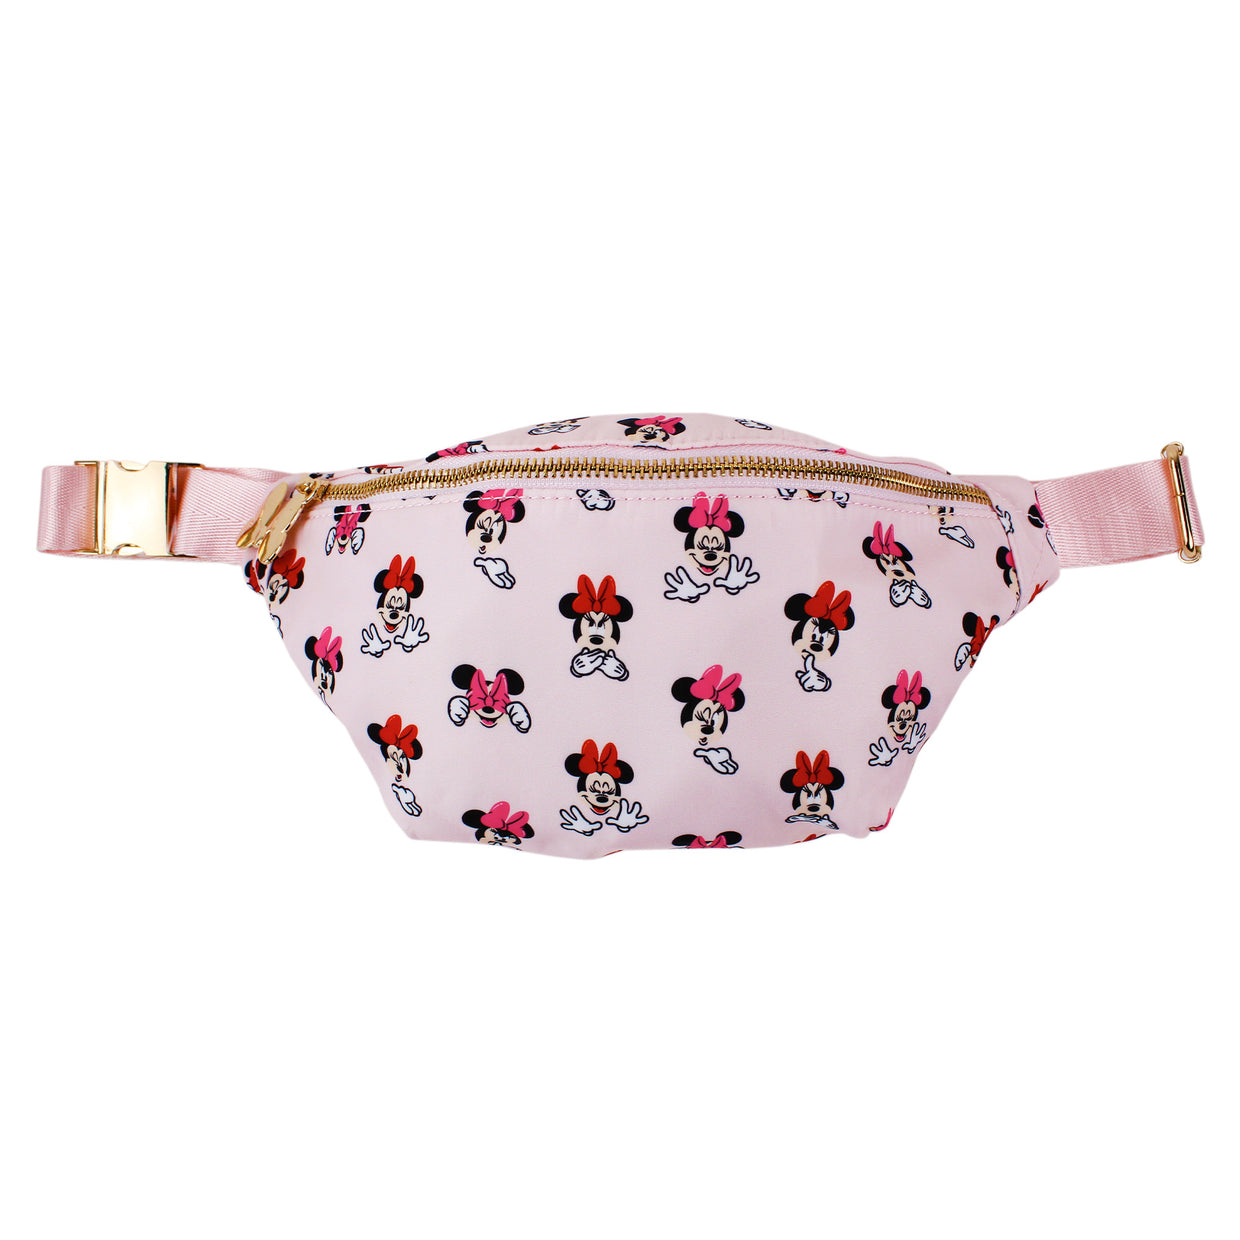 Minnie Mouse Expression Fanny Pack - Cakeworthy